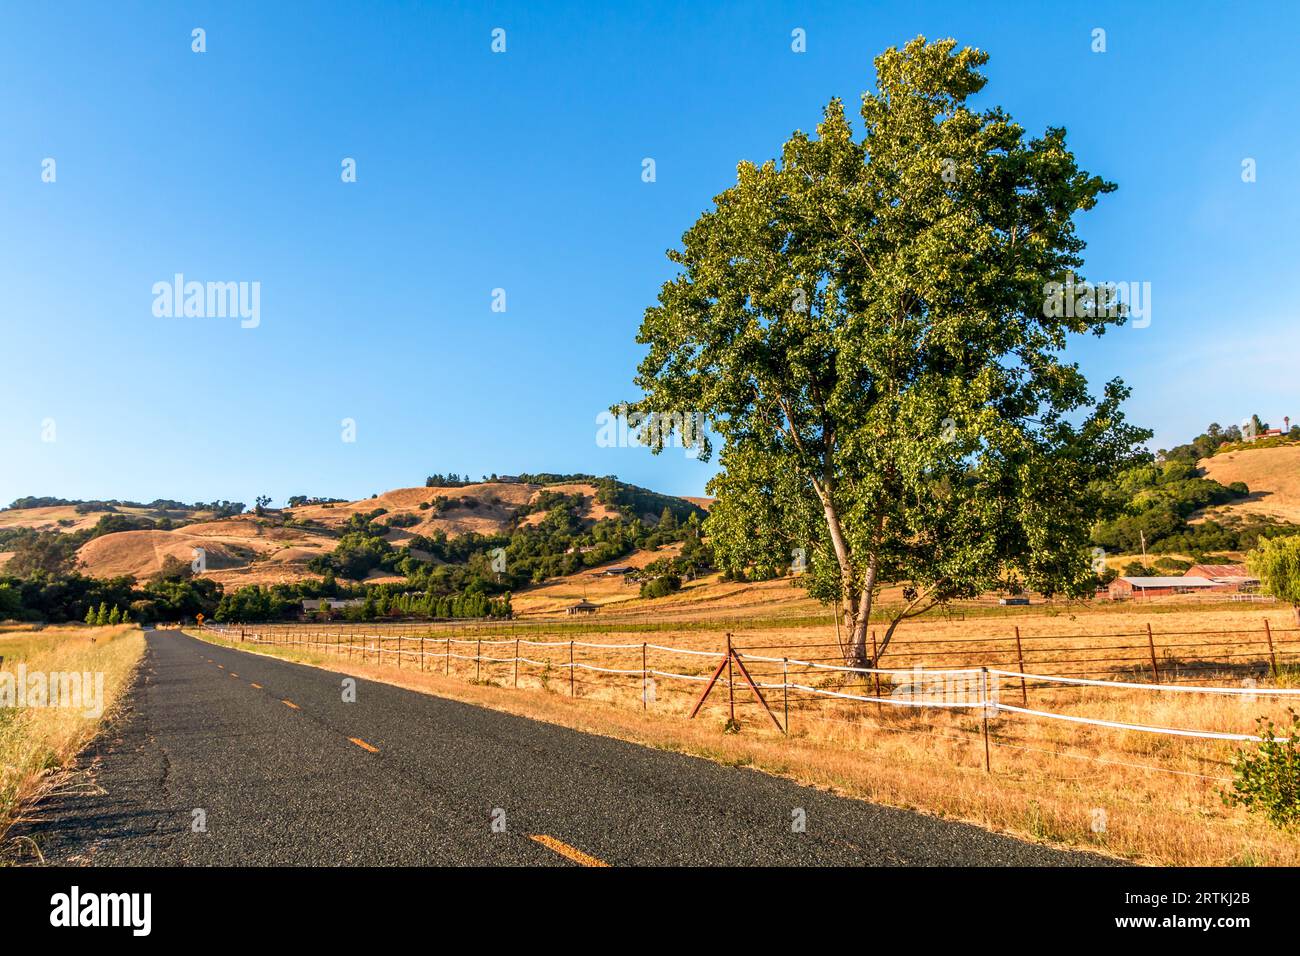 A large tree is growing on the side of a road. The road with a yellow strip is running diagonally and off into the distance. Hills and trees are in th Stock Photo